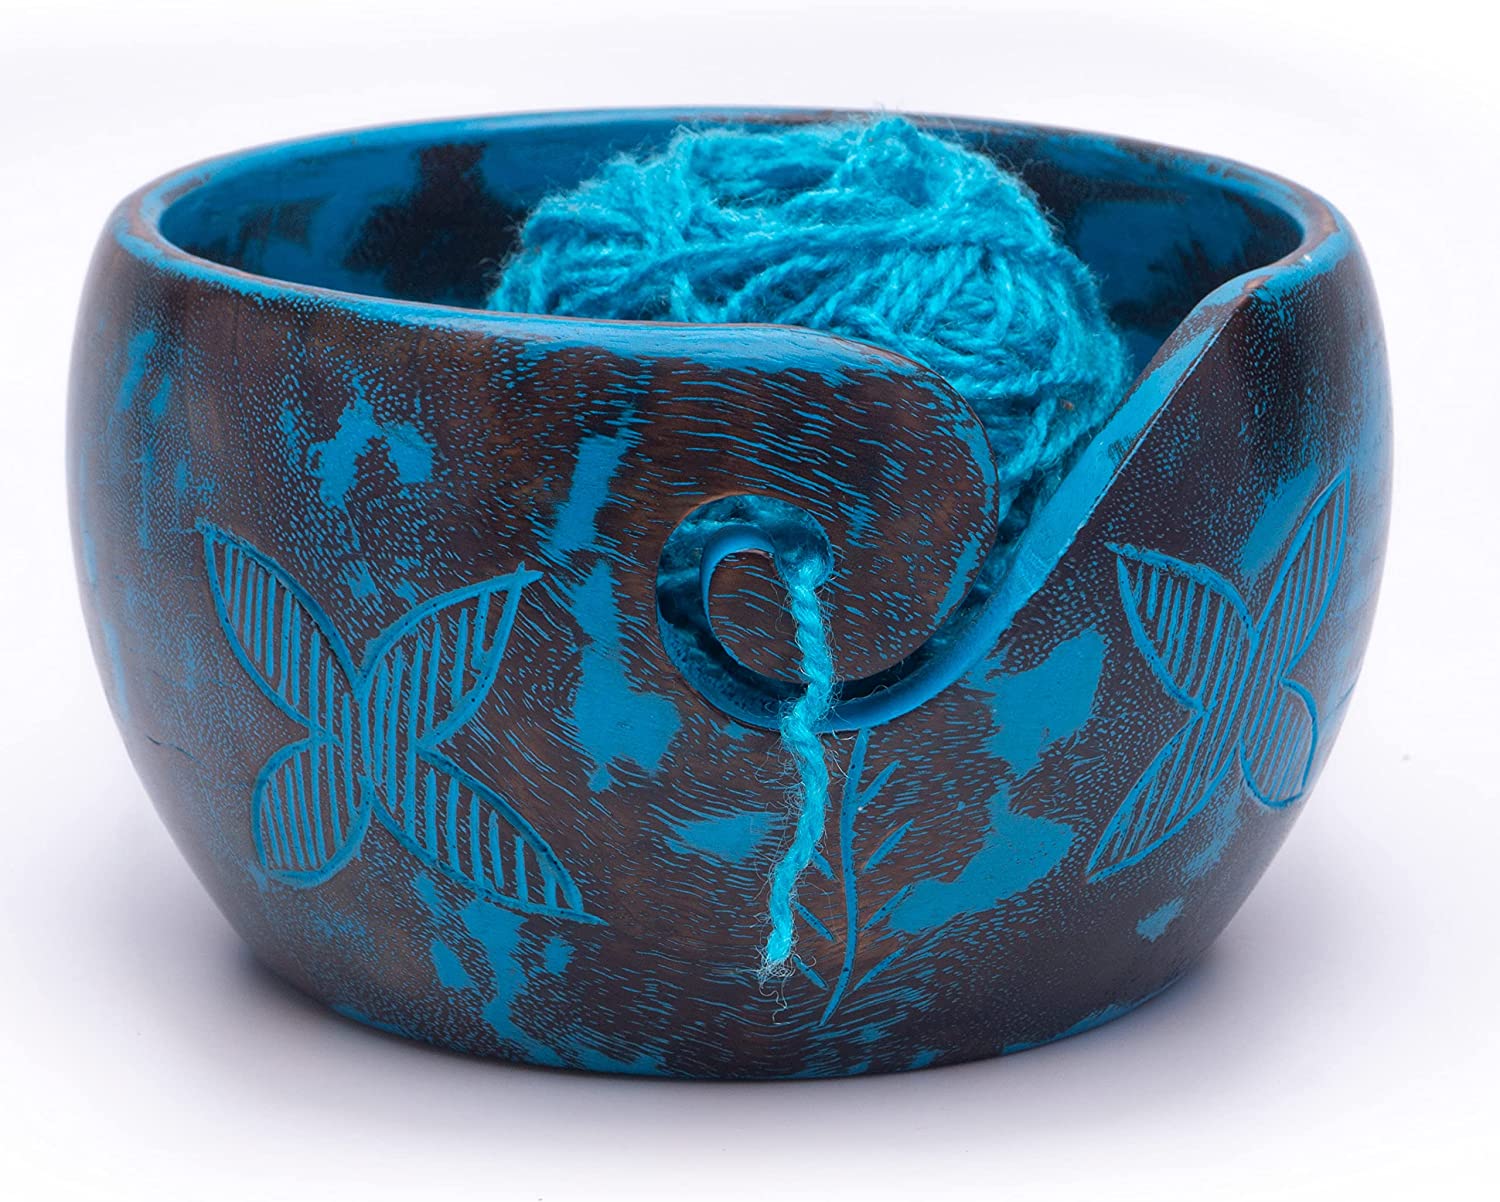 Wooden Yarn Bowls Handcrafted and Handmade Bowls for knitting & Crocheting Purpose | Trendy Yarn bowls